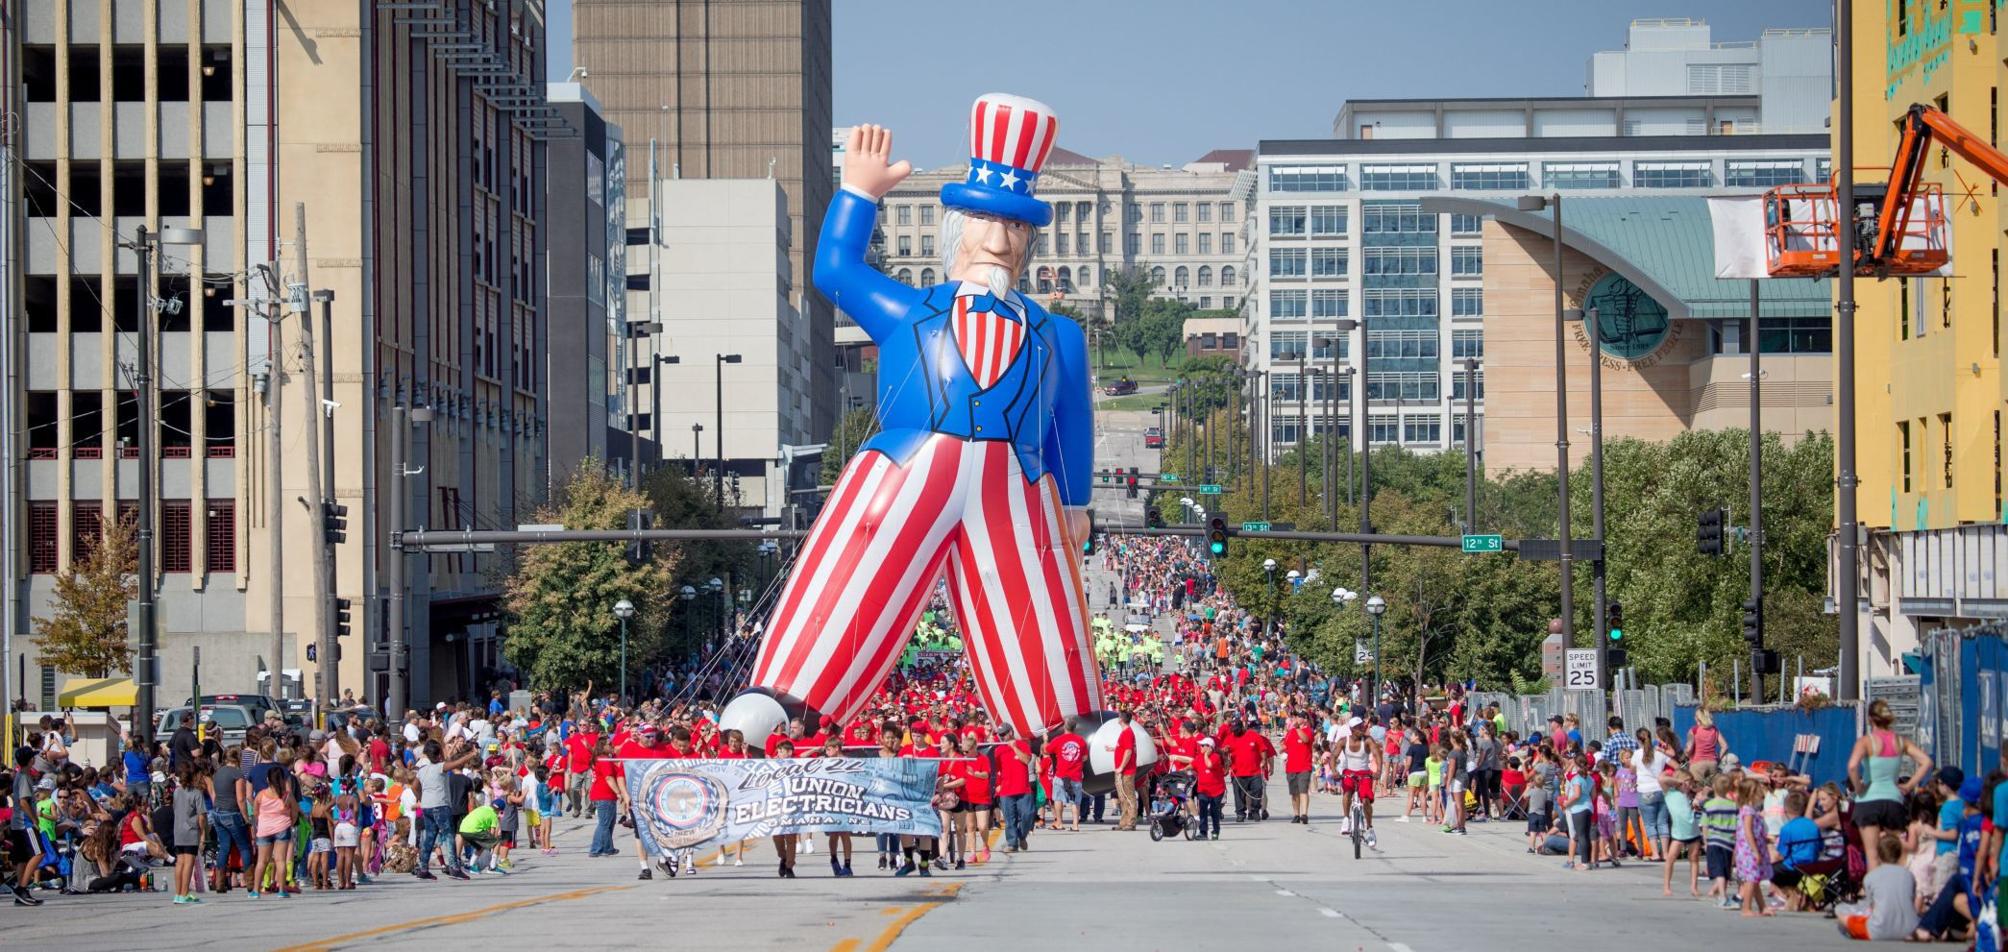 Streets were damp but spirits high at Omaha's annual Labor Day